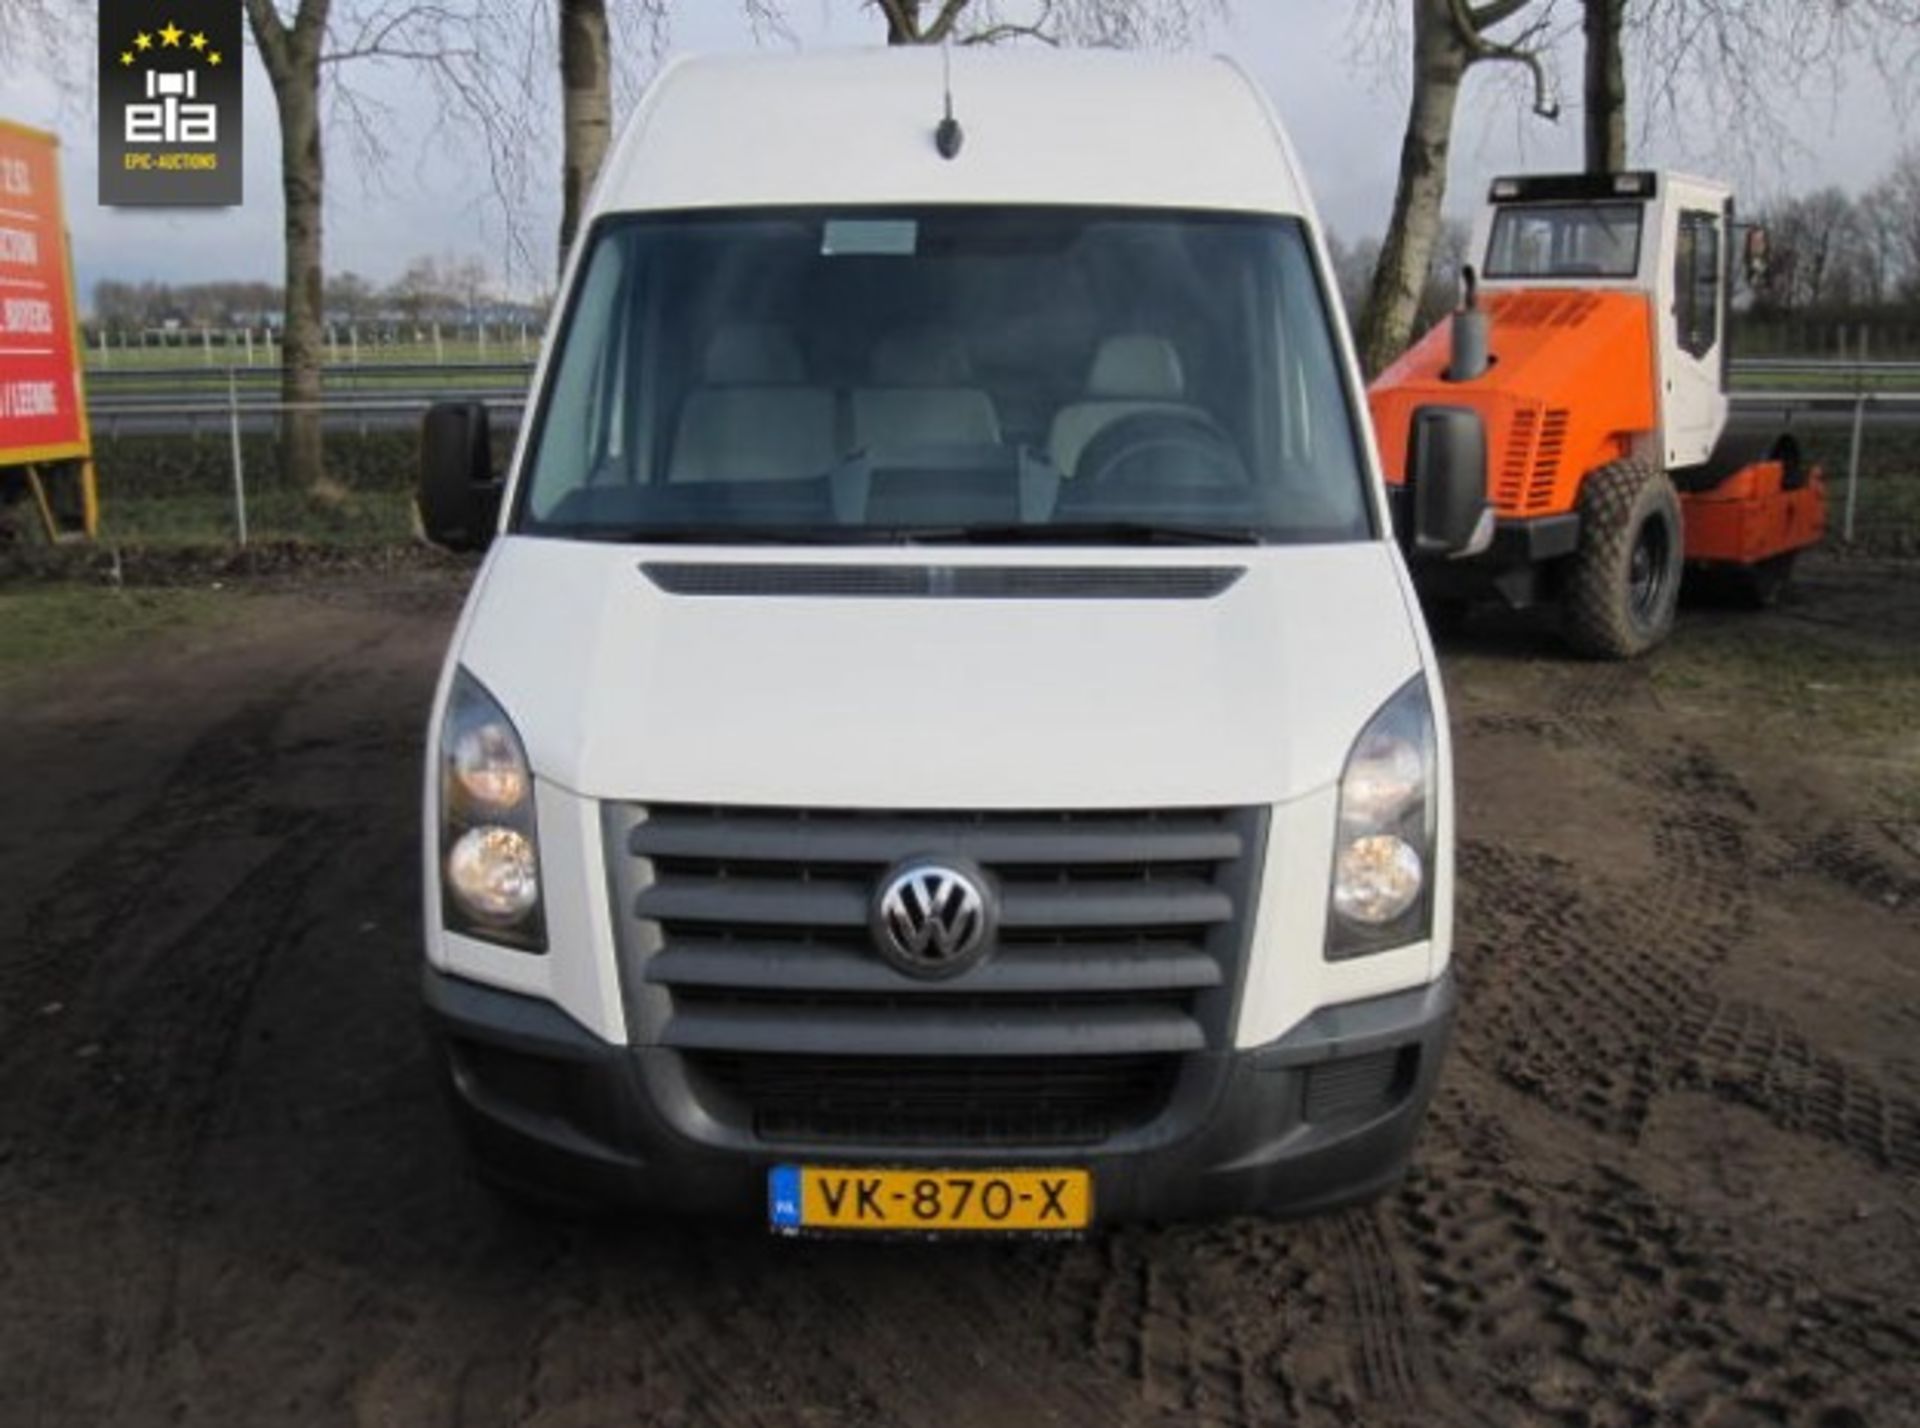 2011 Volkswagen Crafter 2.5 TDI L2H2 20151051 - Image 8 of 26